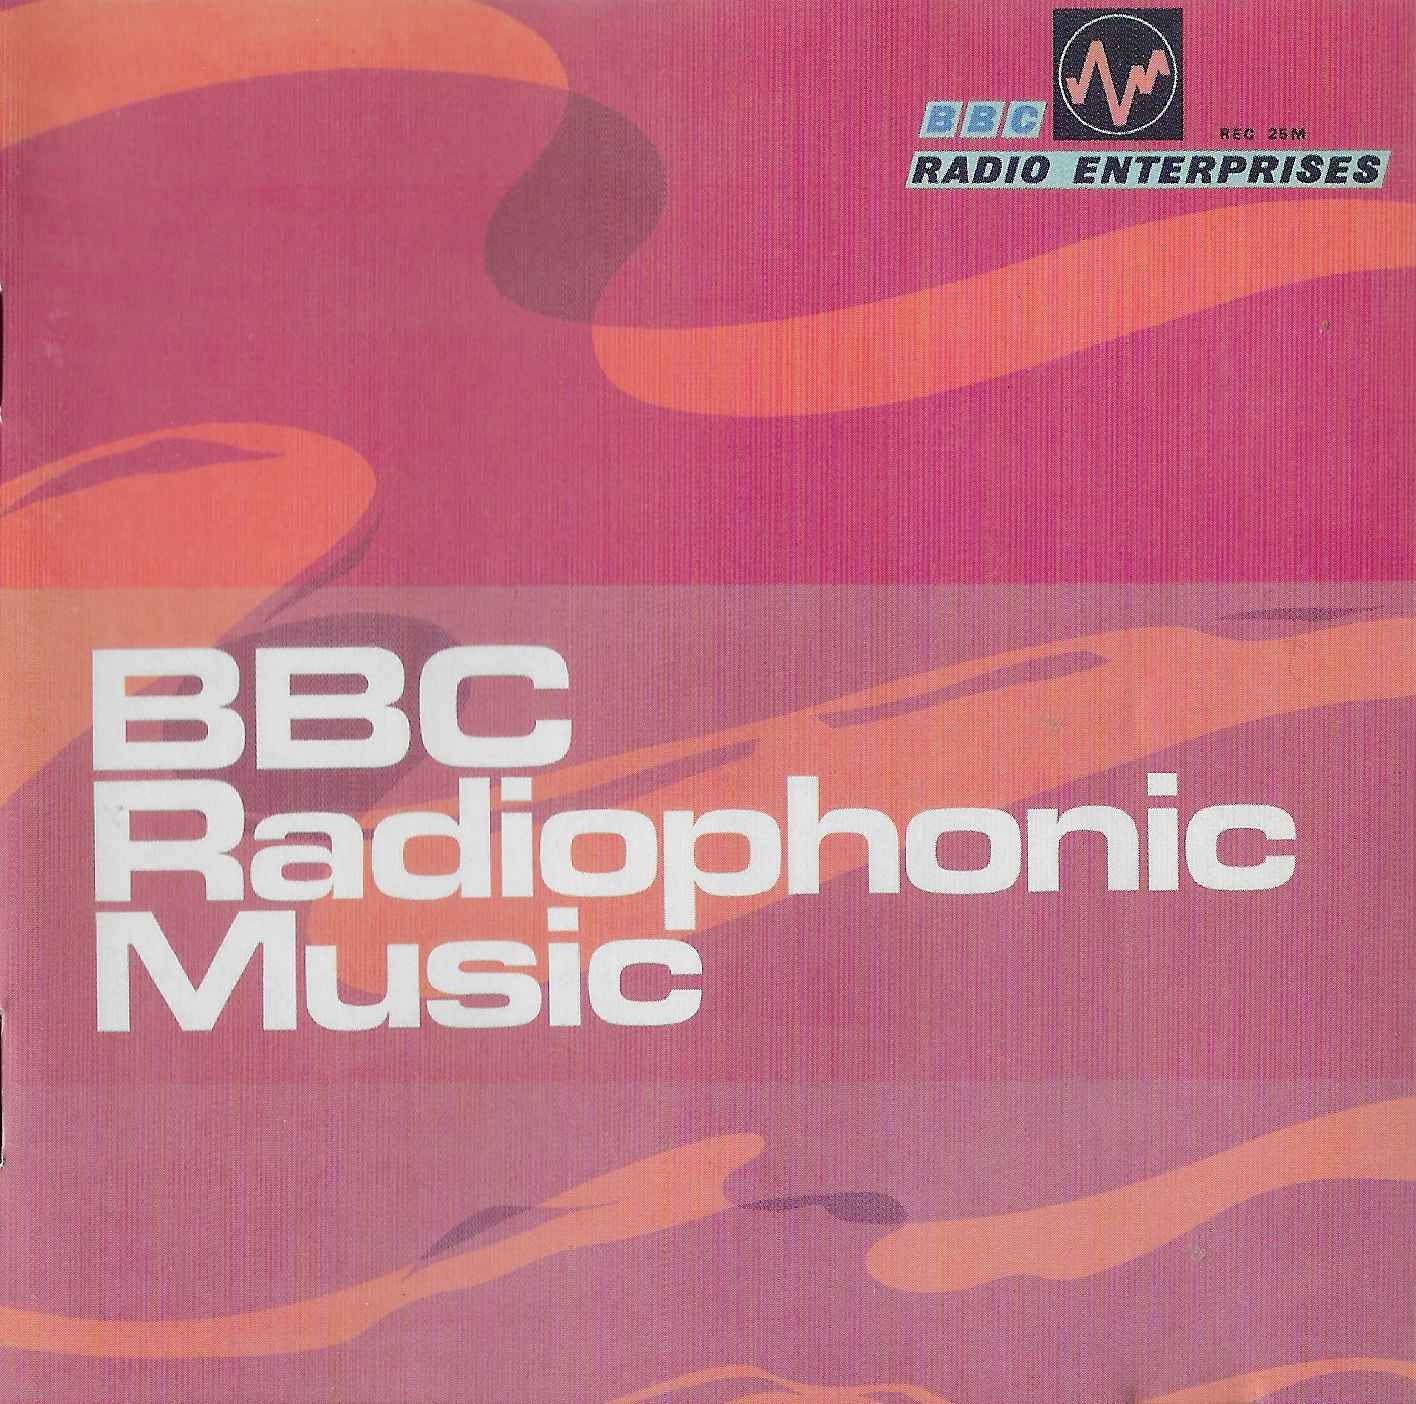 Picture of BBC Radiophonic music by artist David Cain / John Baker / Delia Derbyshire from the BBC cds - Records and Tapes library